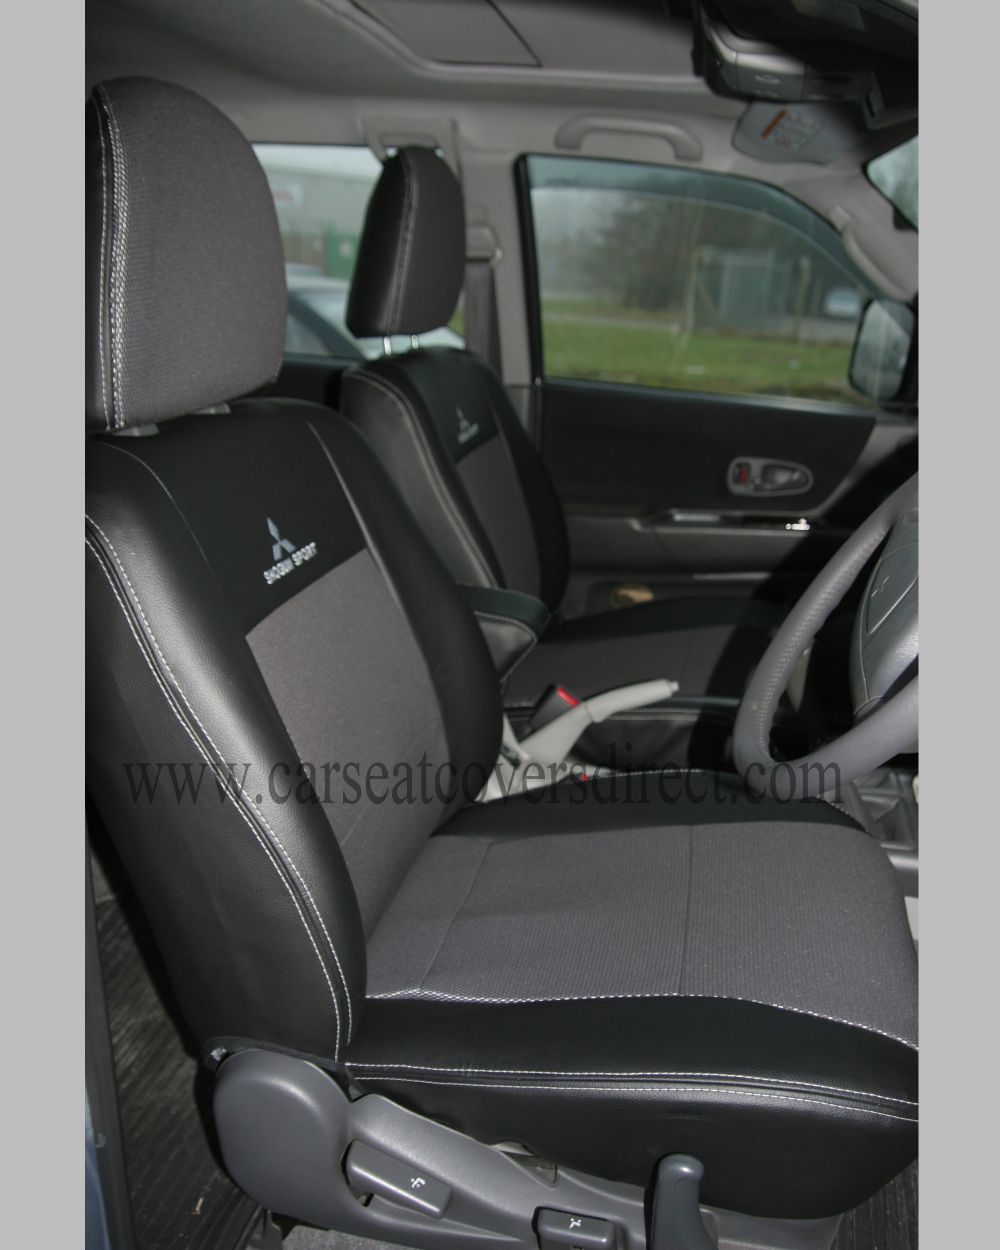 Toyota Hilux Seat Cover